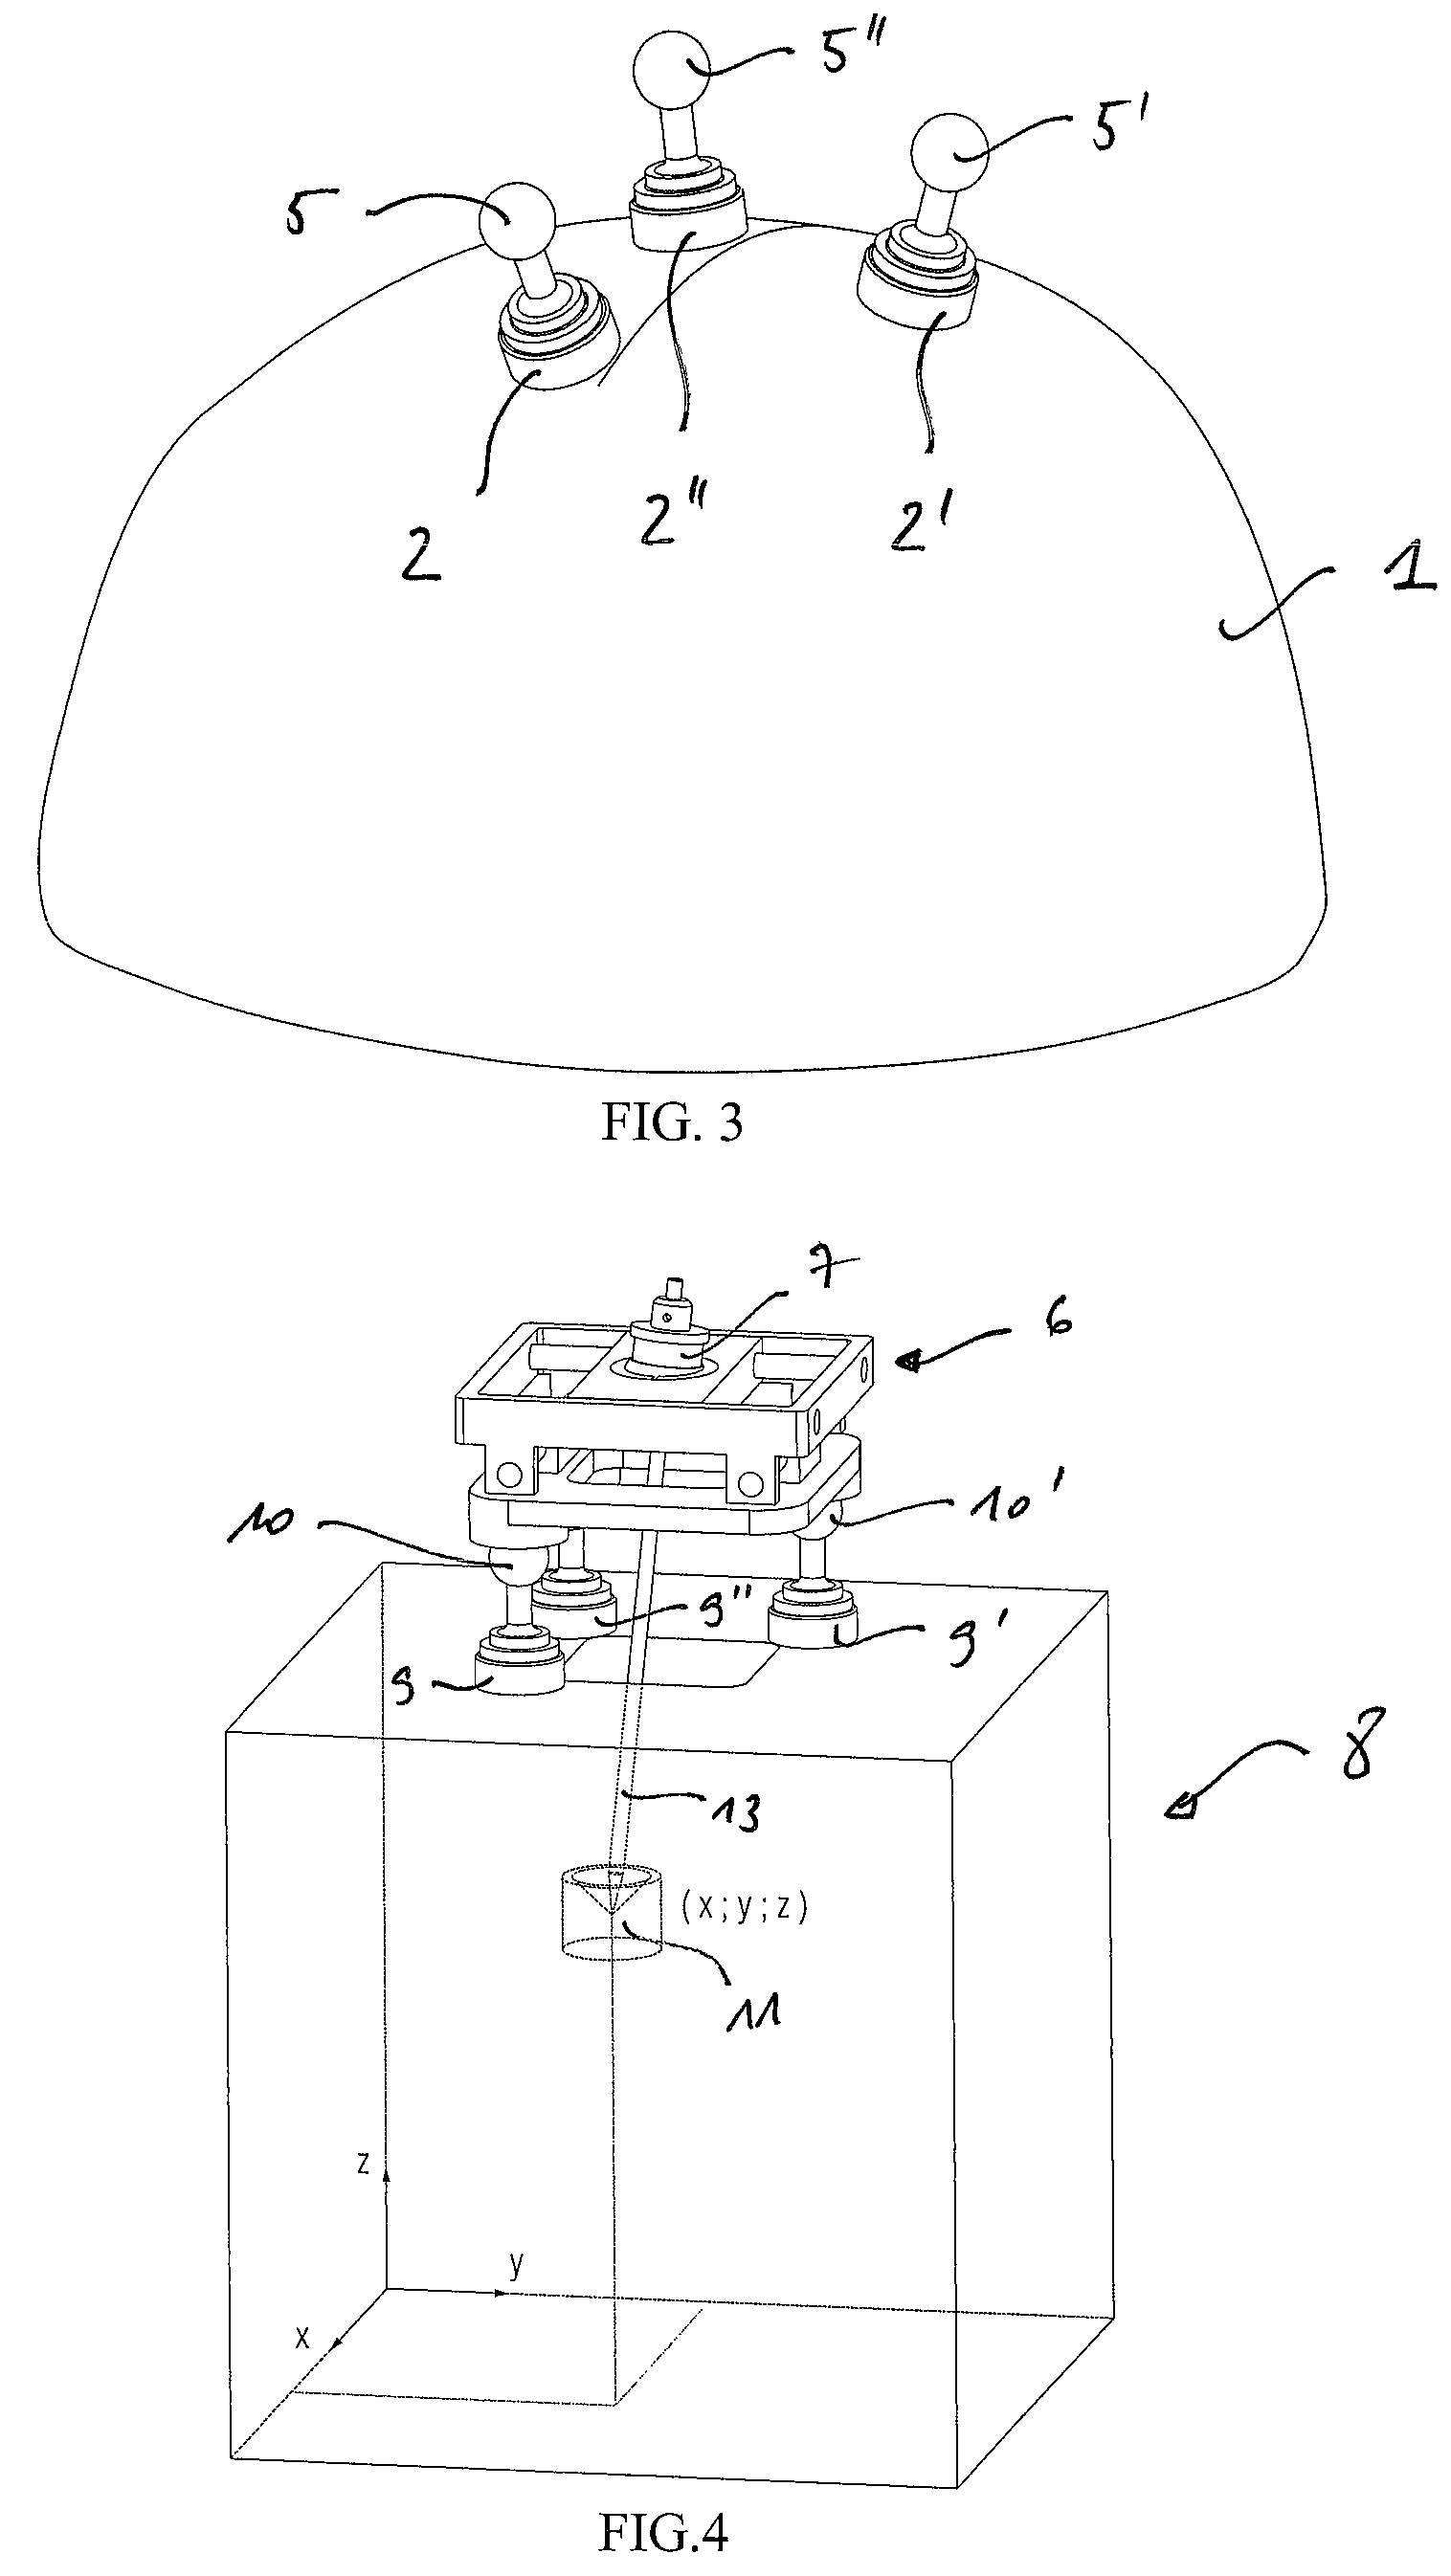 Adjustable stereotactic device and method for frameless neurosurgical stereotaxy